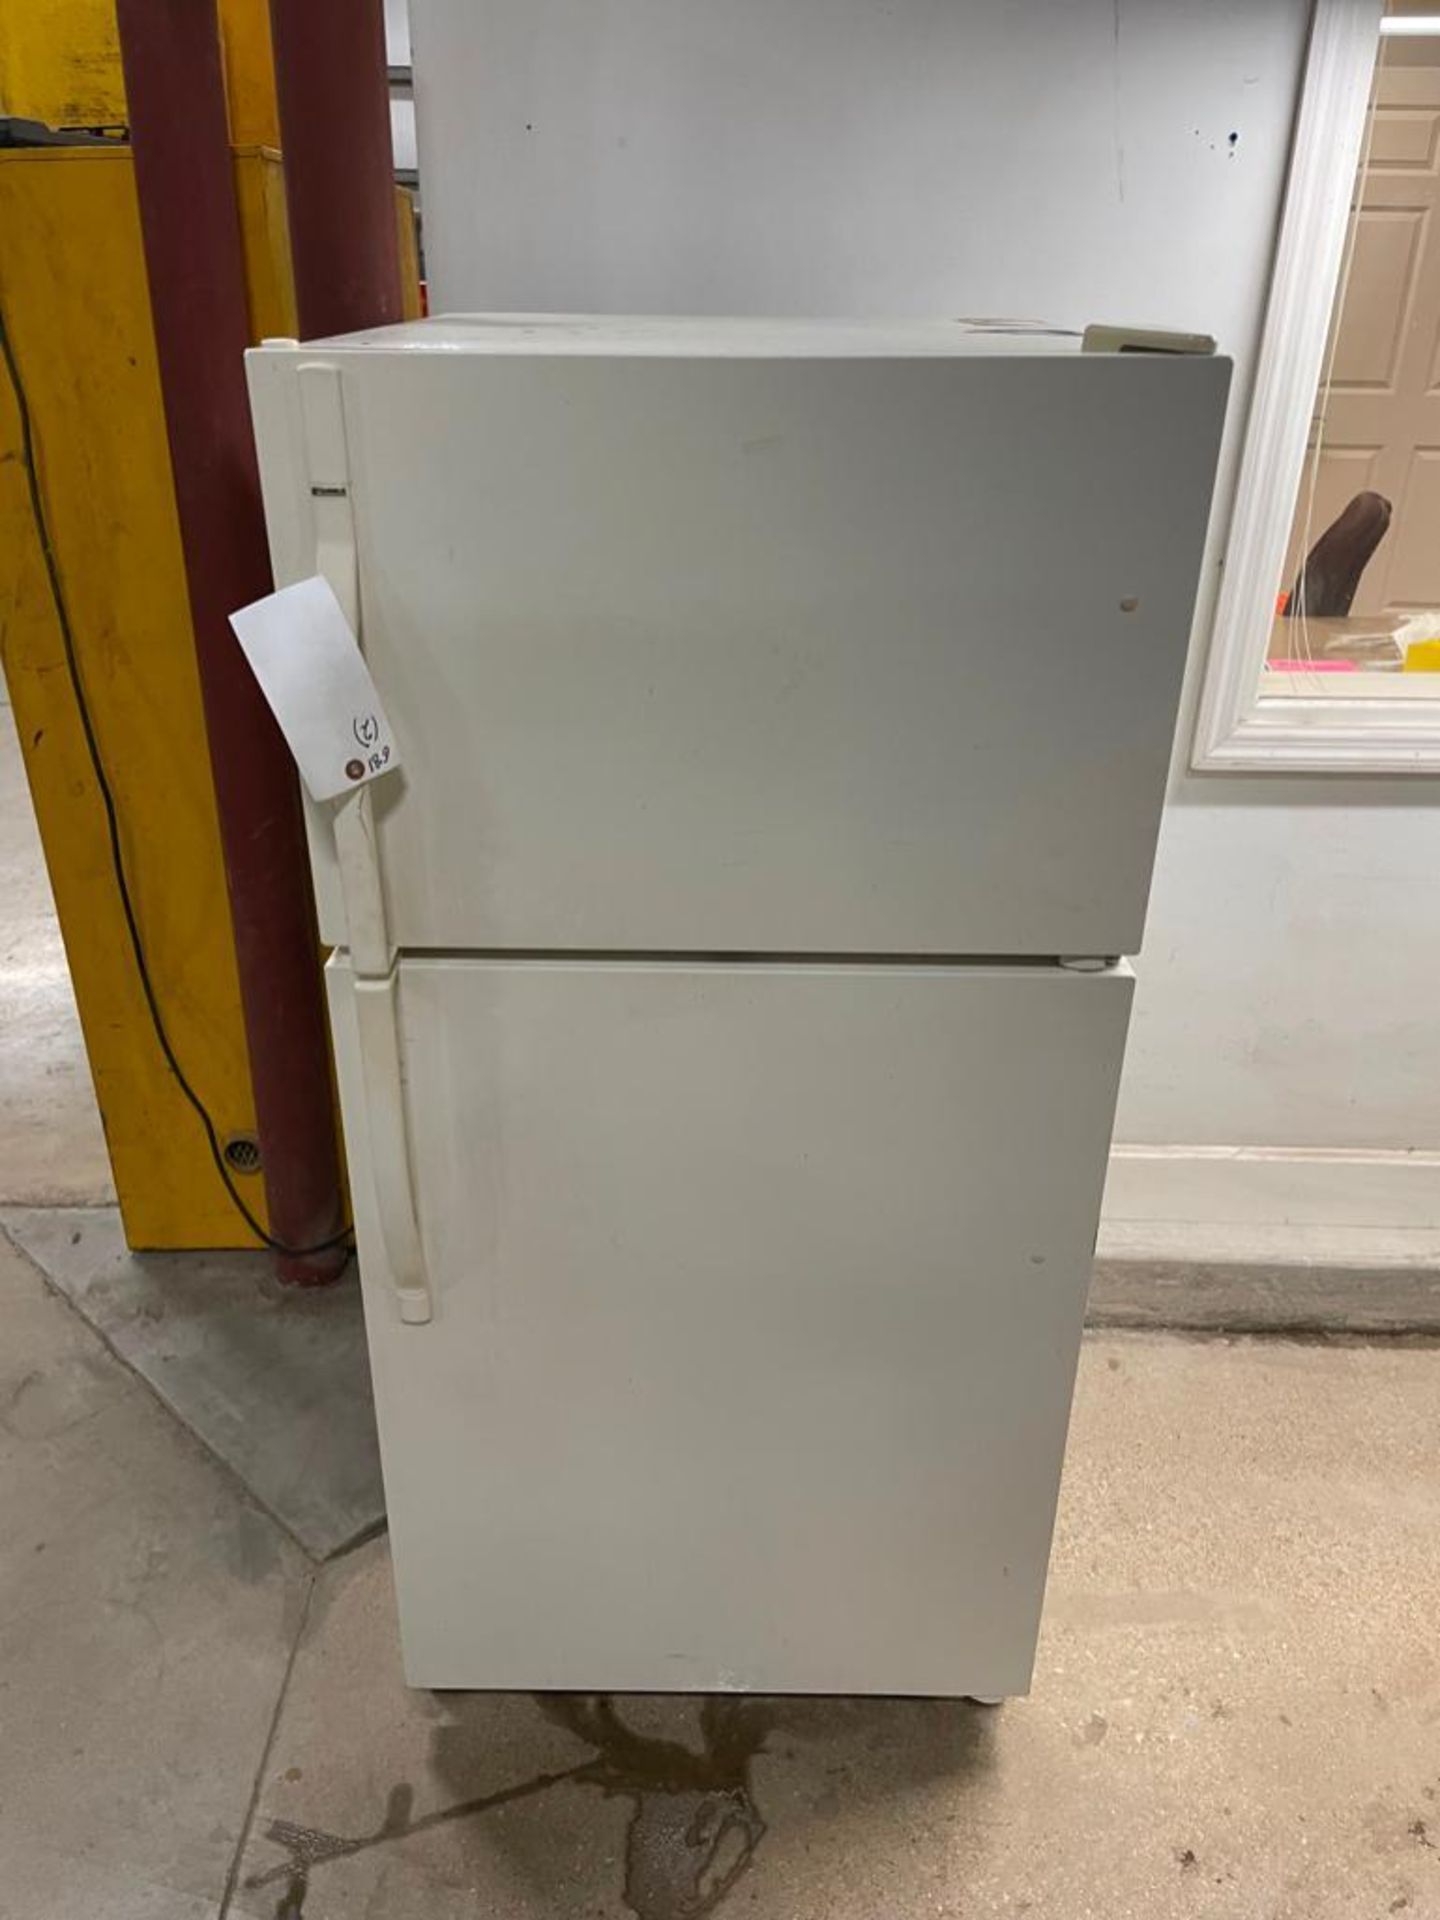 (2) Refrigerator/Freezers. Located in Hazelwood, MO - Image 3 of 8